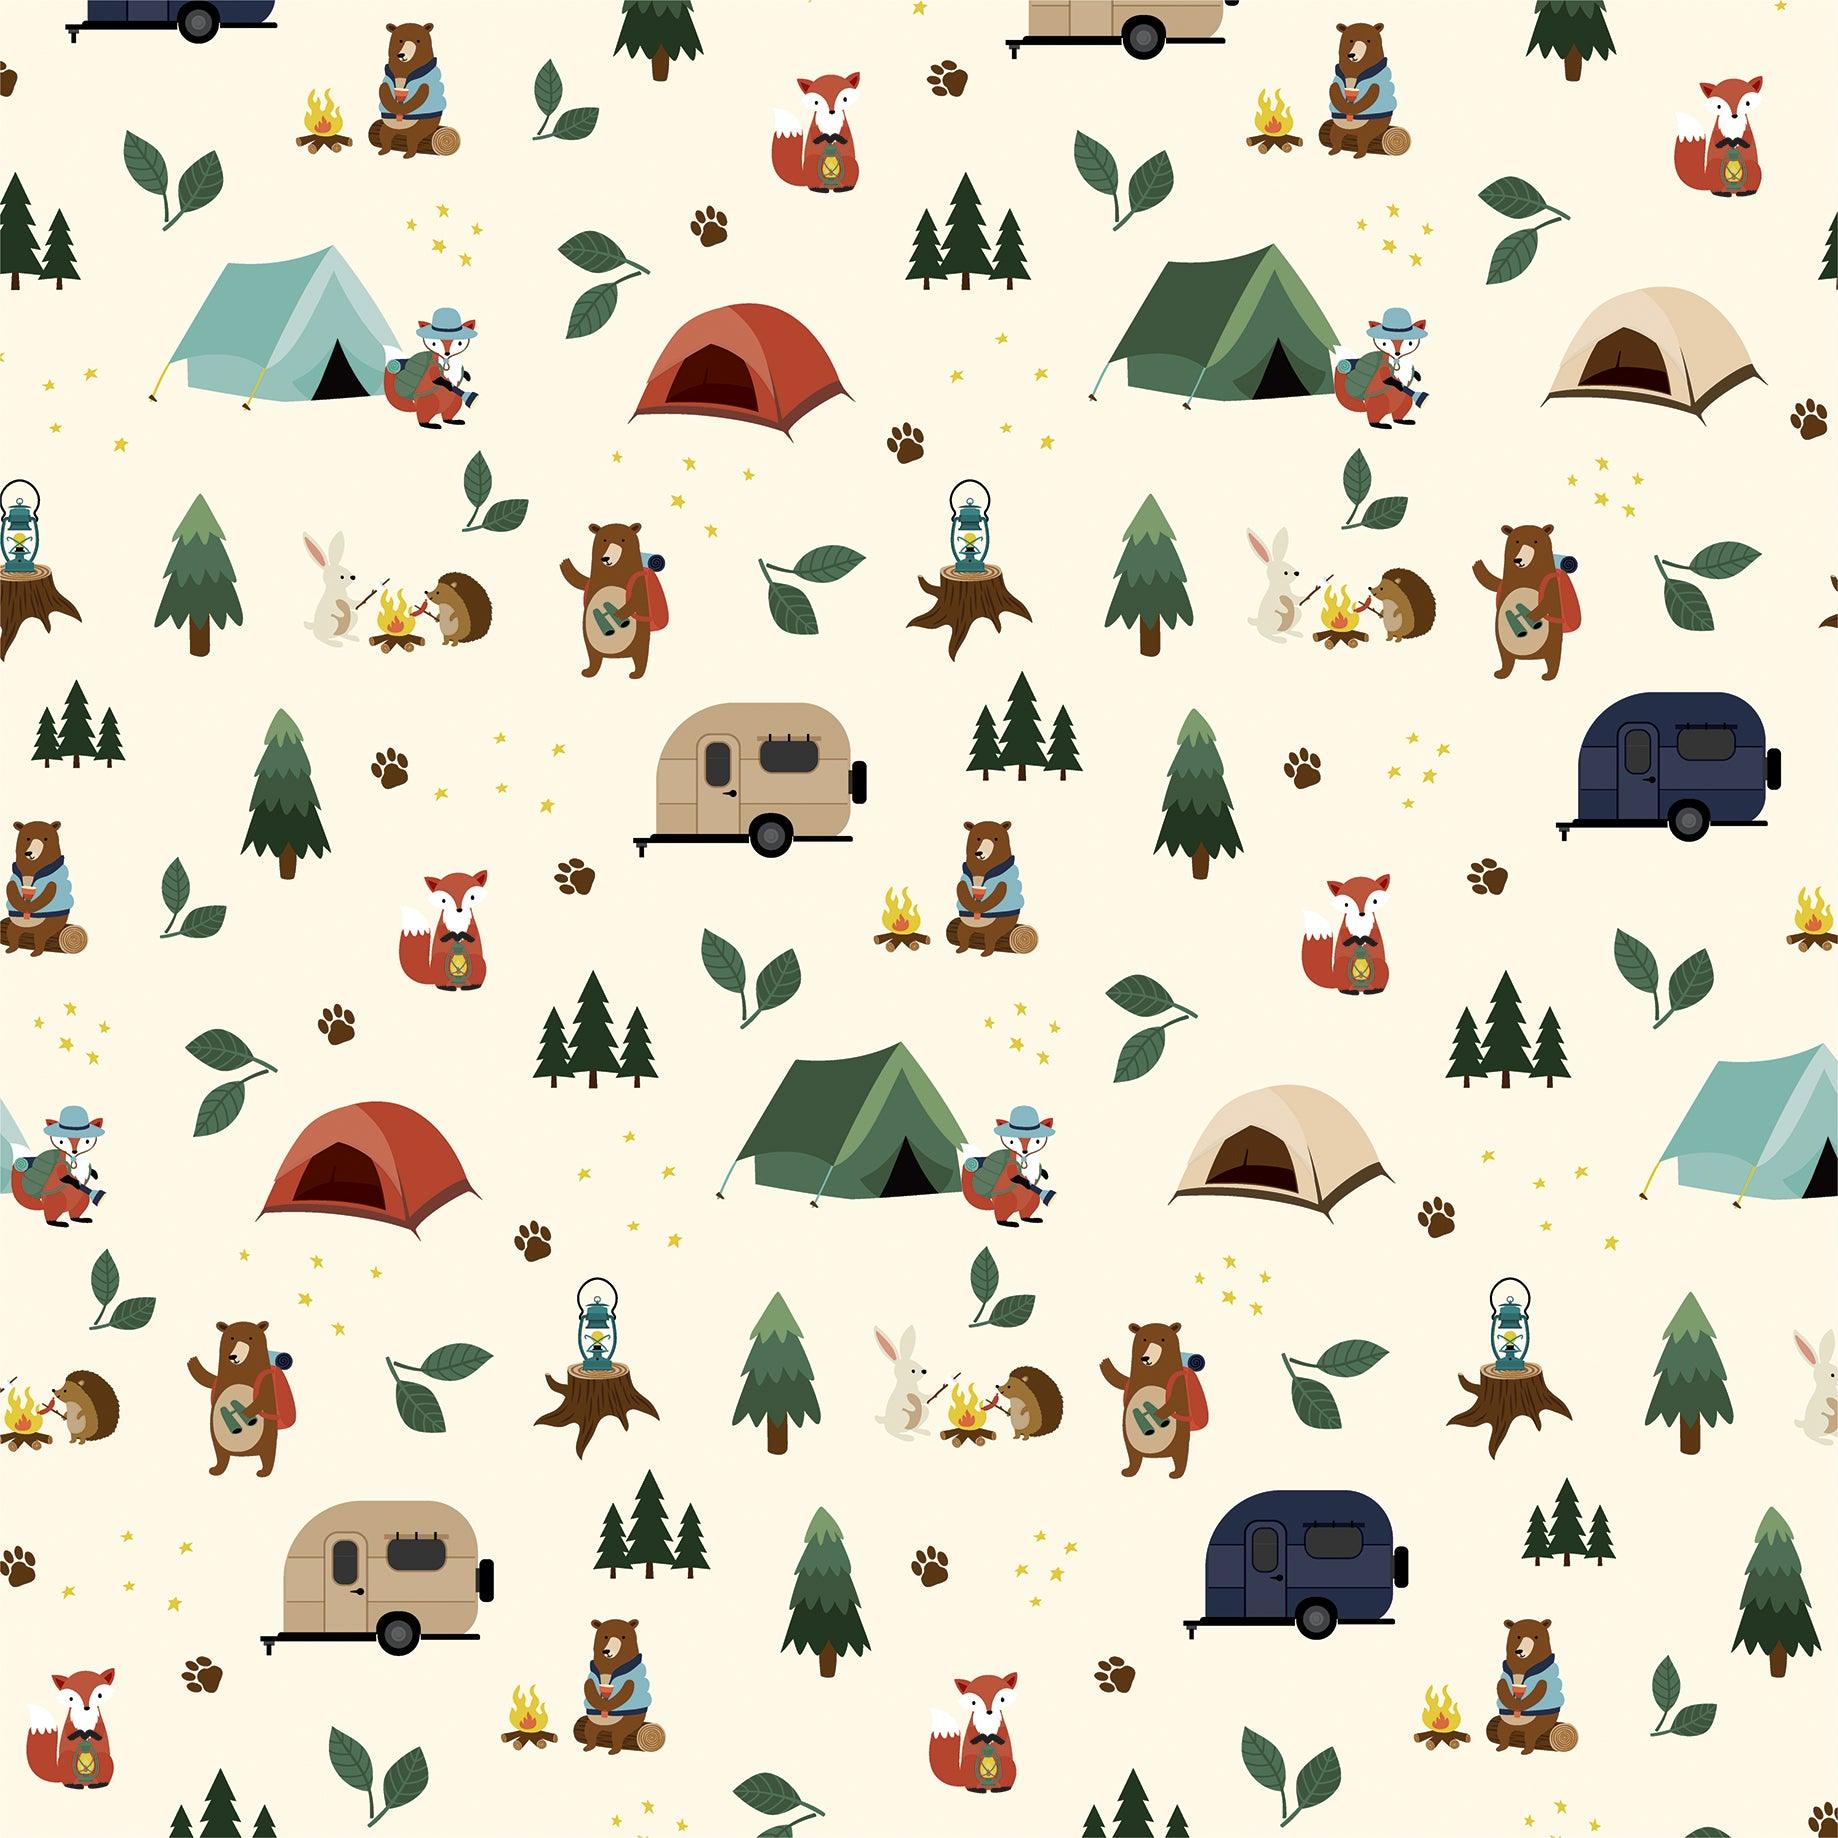 Call Of The Wild Collection Camping Critters 12 x 12 Double-Sided Scrapbook Paper by Echo Park Paper - Scrapbook Supply Companies